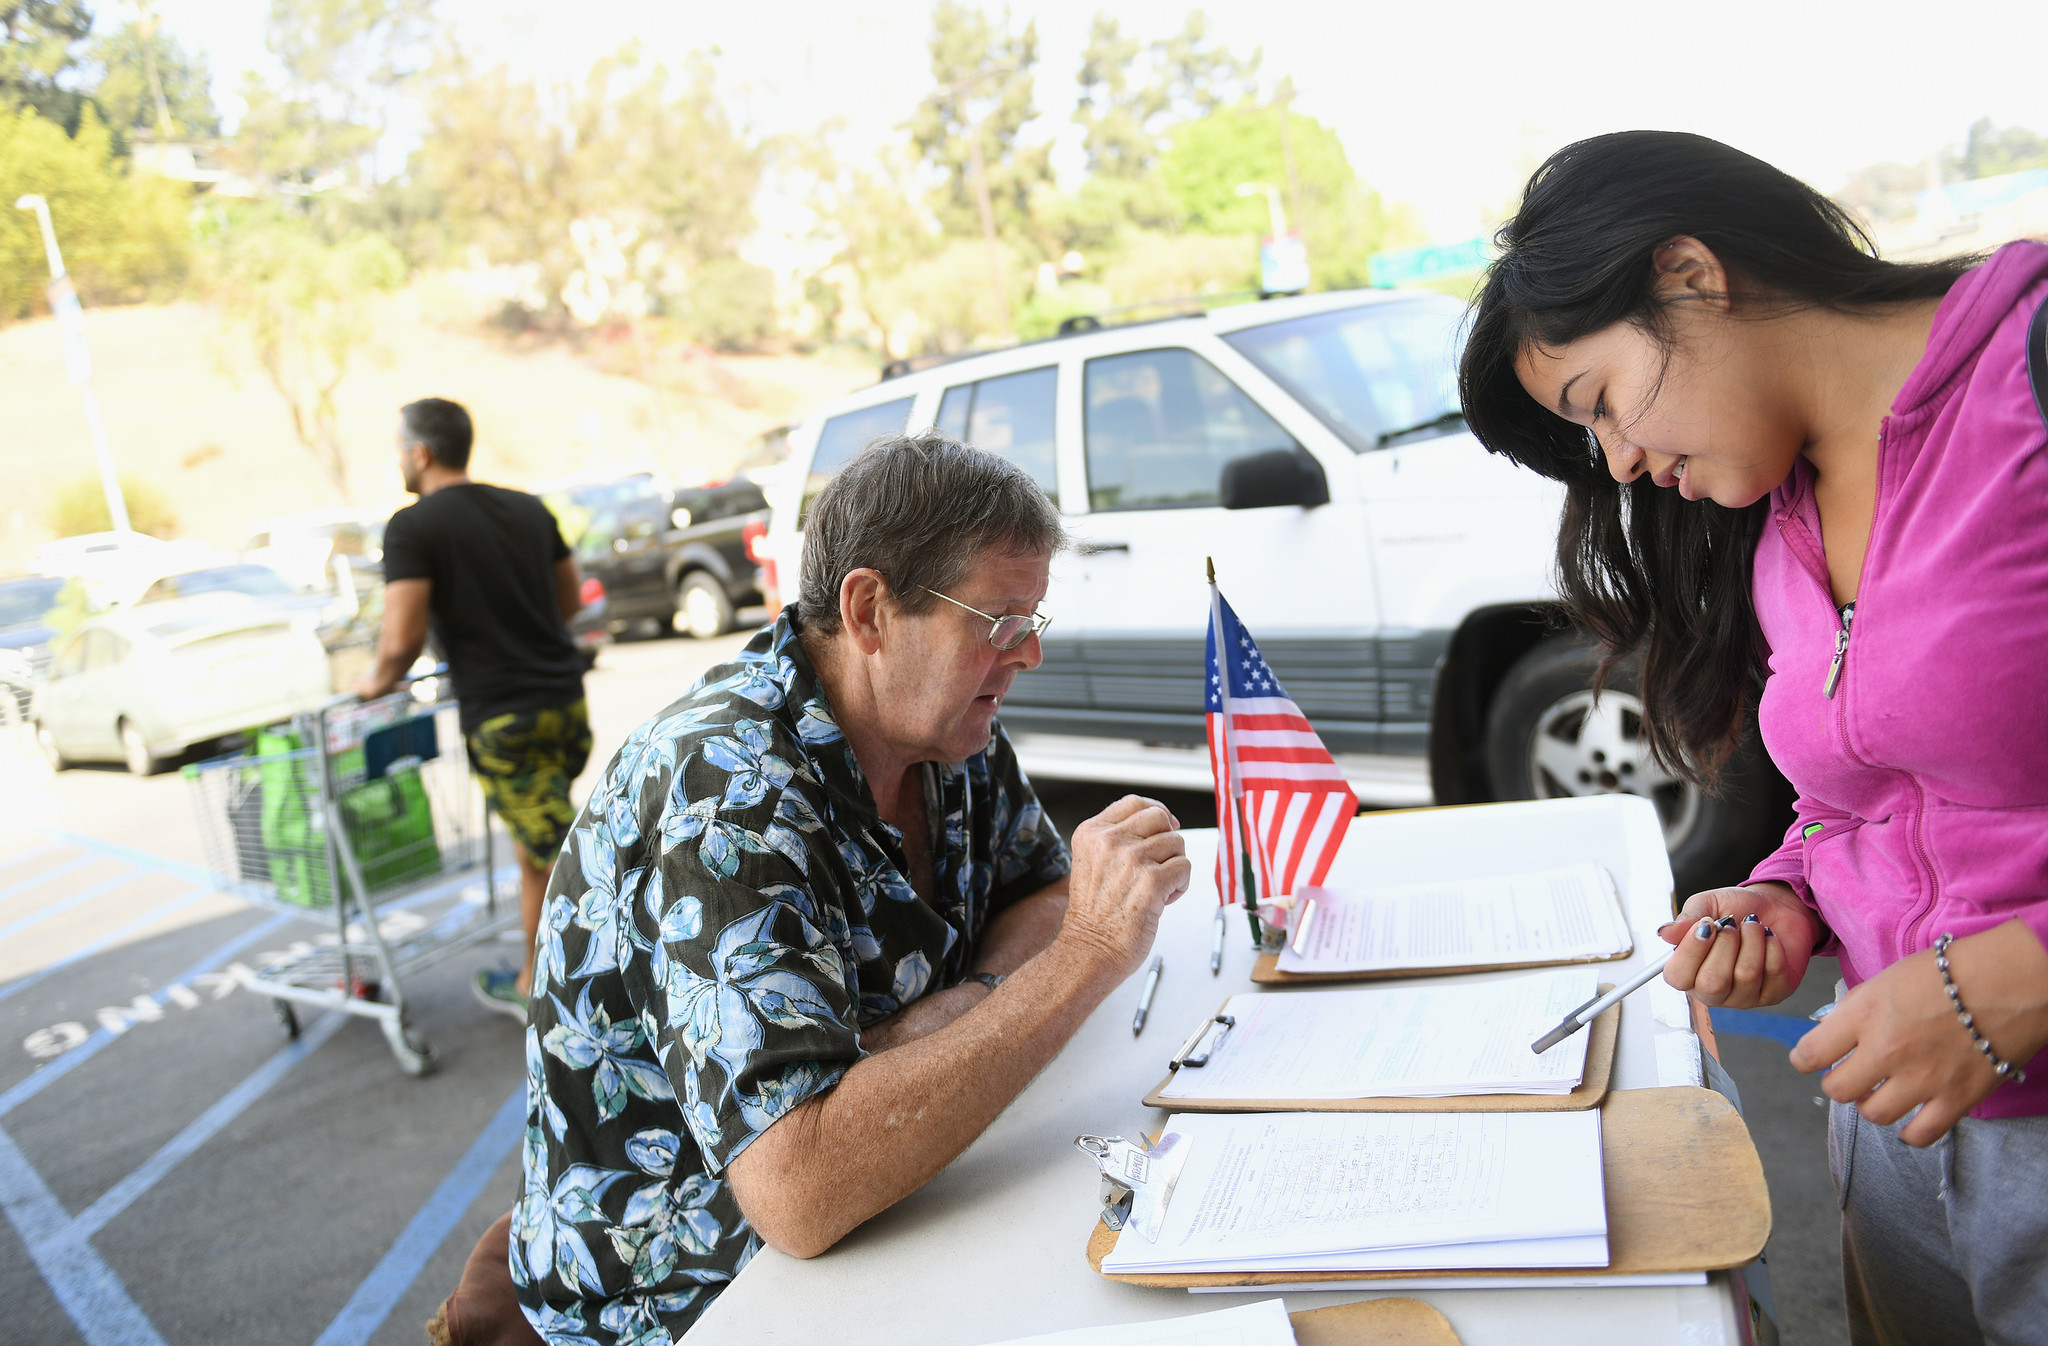 Tim Ecker collects signatures from Antonia Lopez, 19, in Silver Lake. Ecker says he made as much as $3,000 a week during peak season this year.